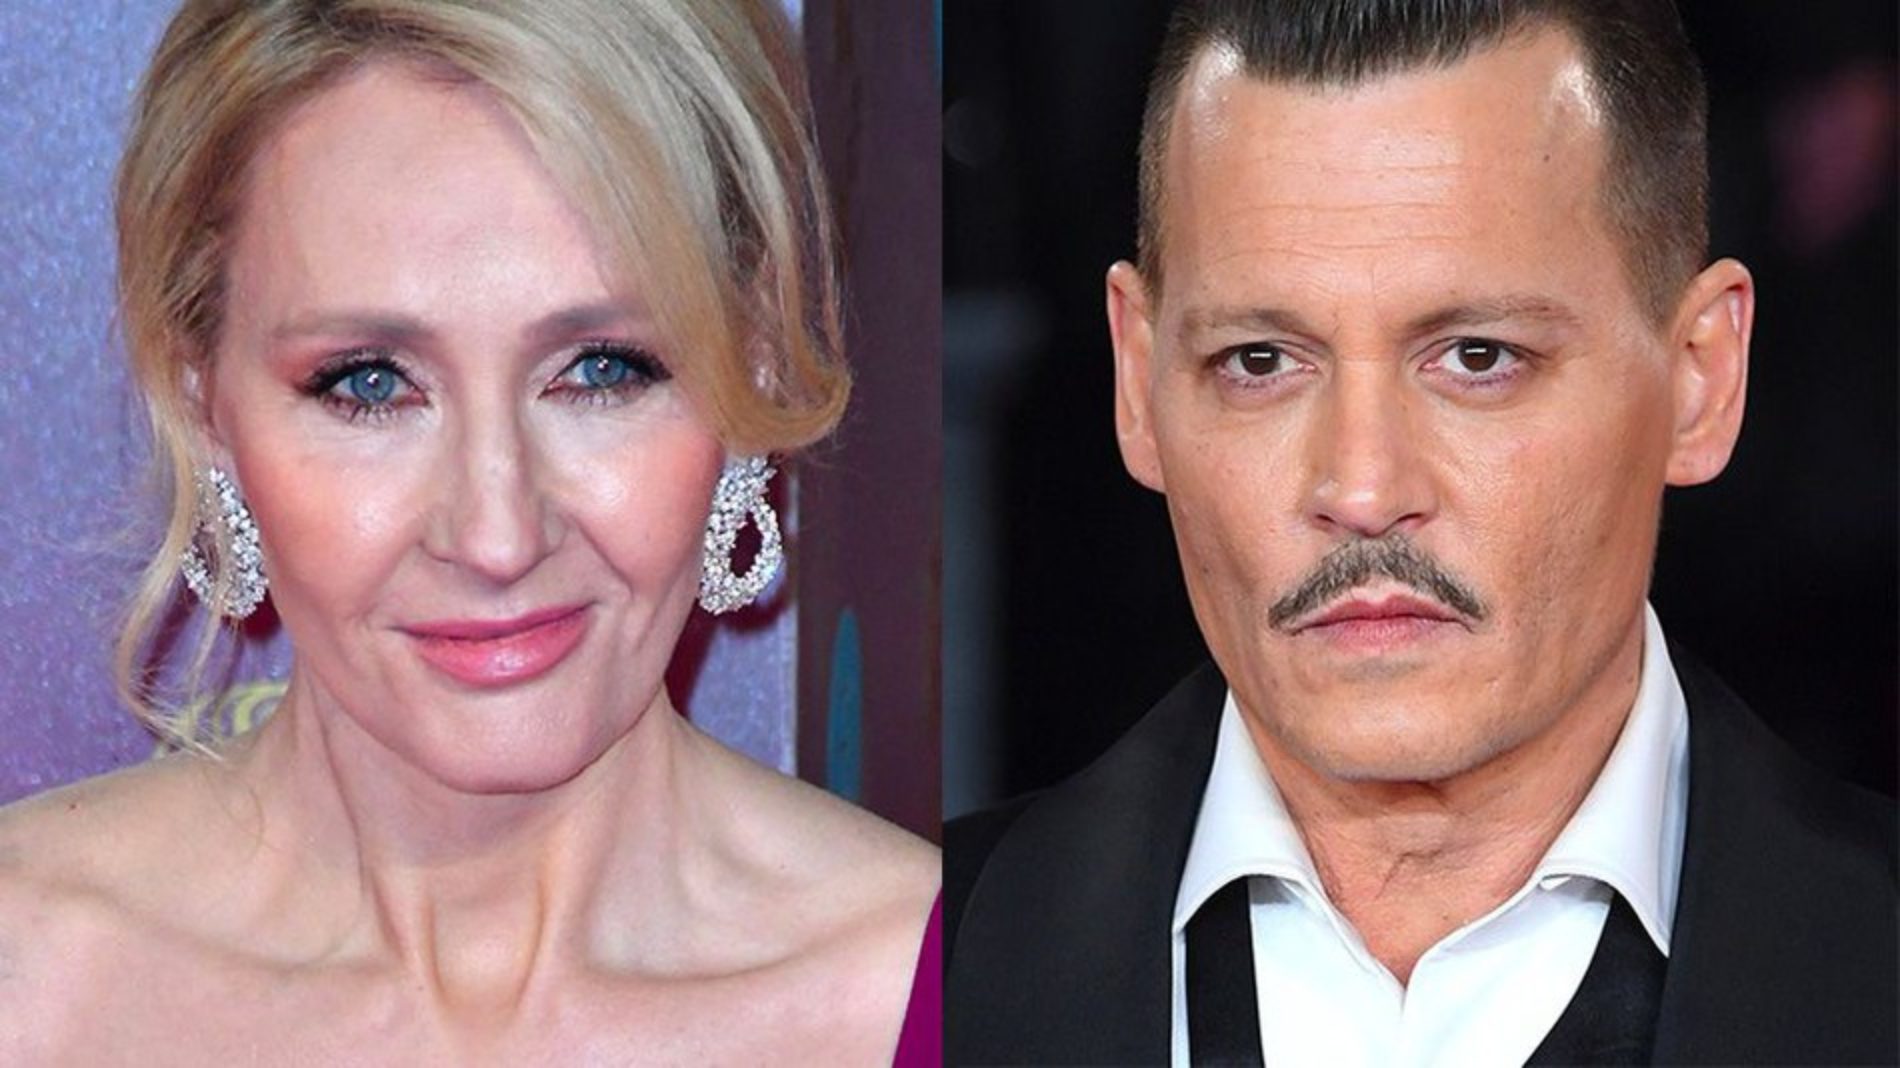 Harry Potter fans are not happy with JK Rowling for defending Johnny Depp